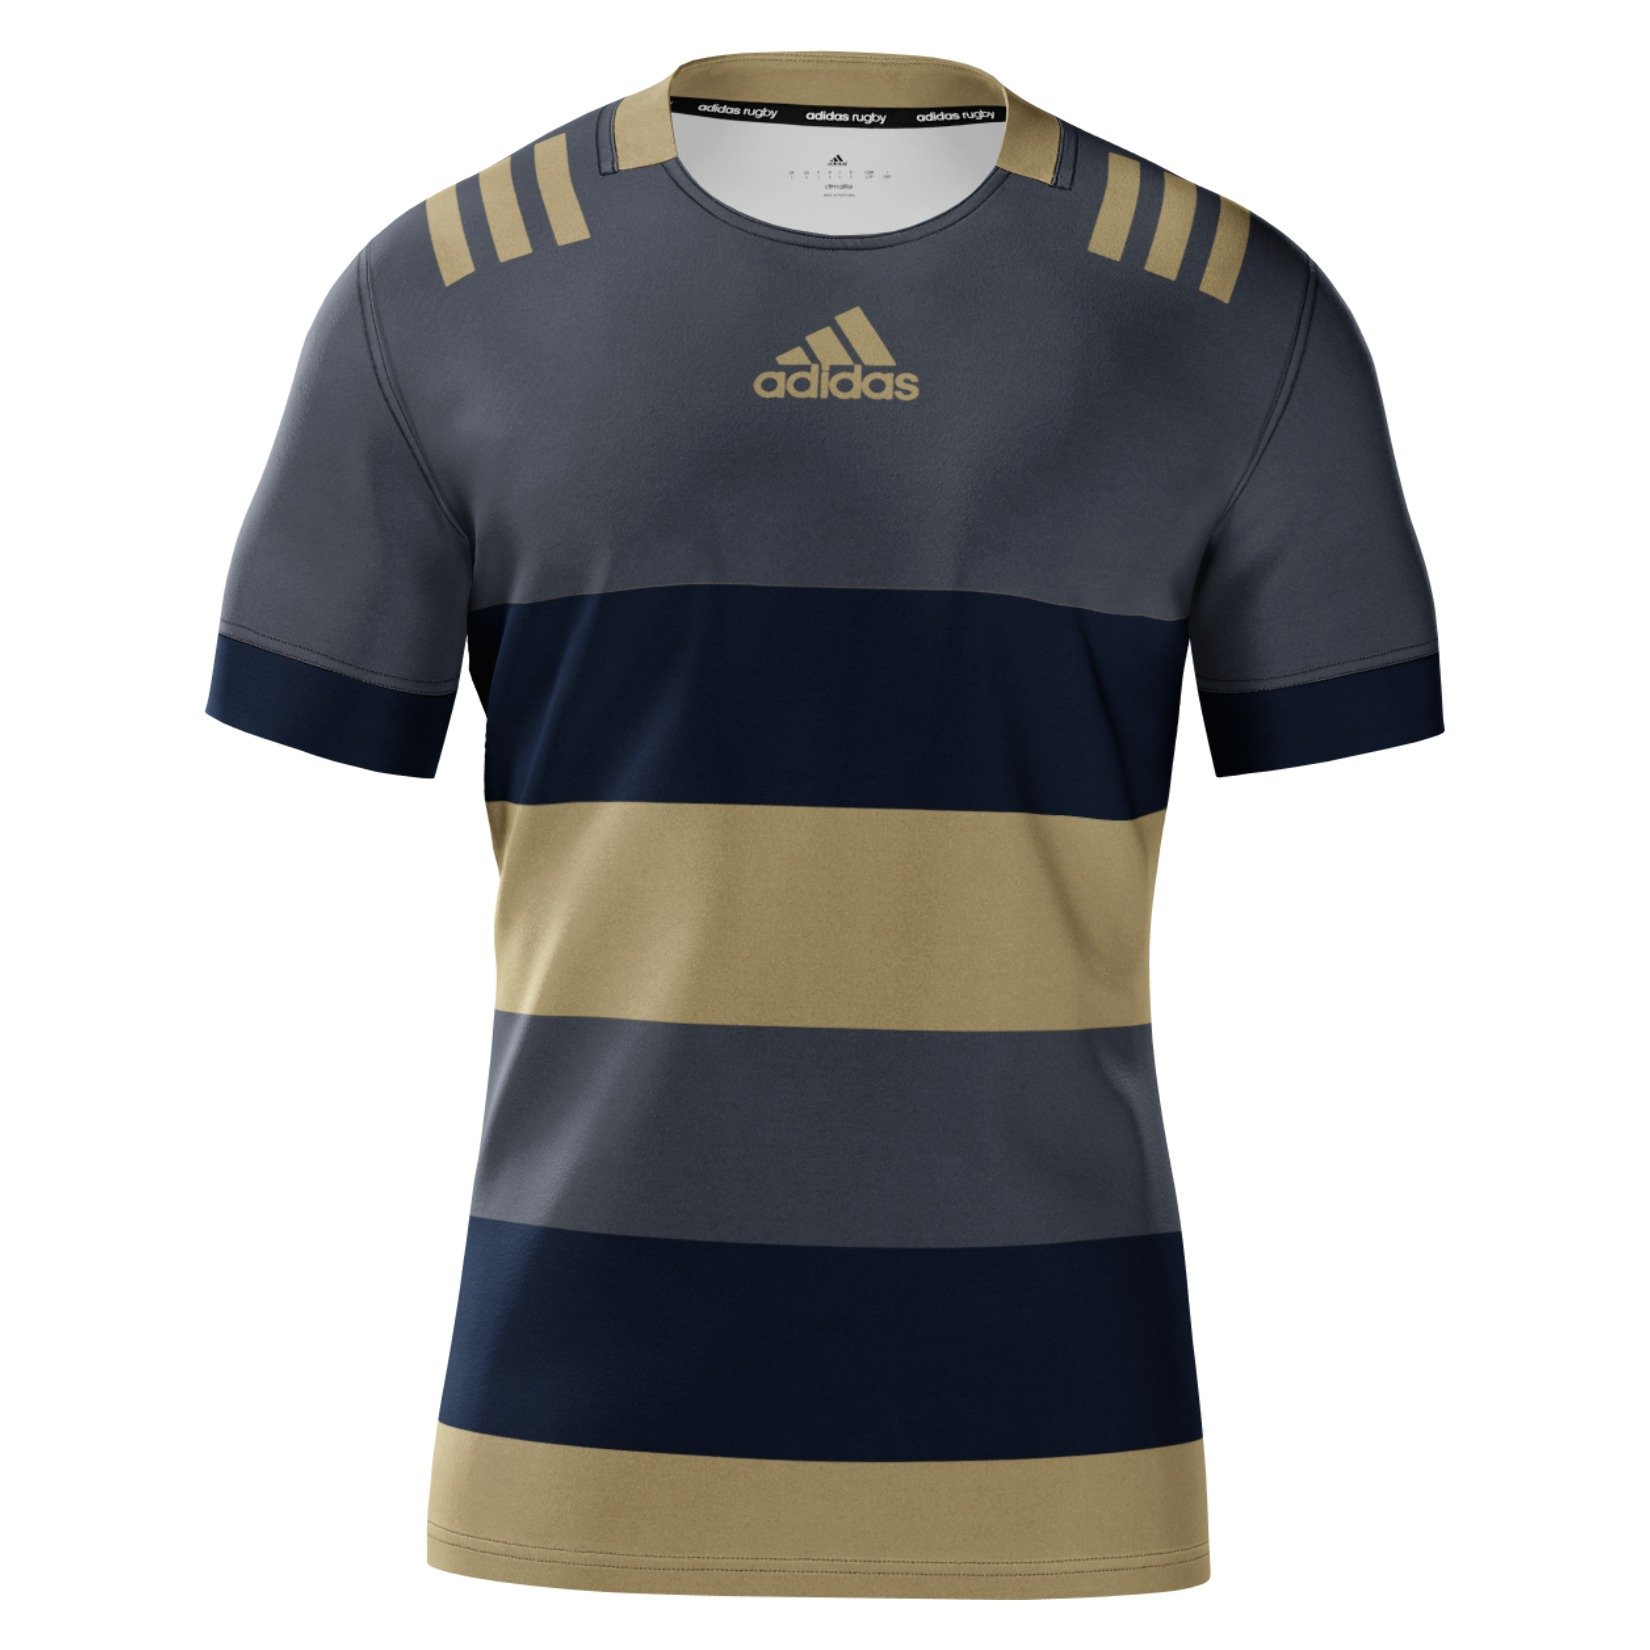 adidas miTeam Regular Fit Rugby Jersey Adult